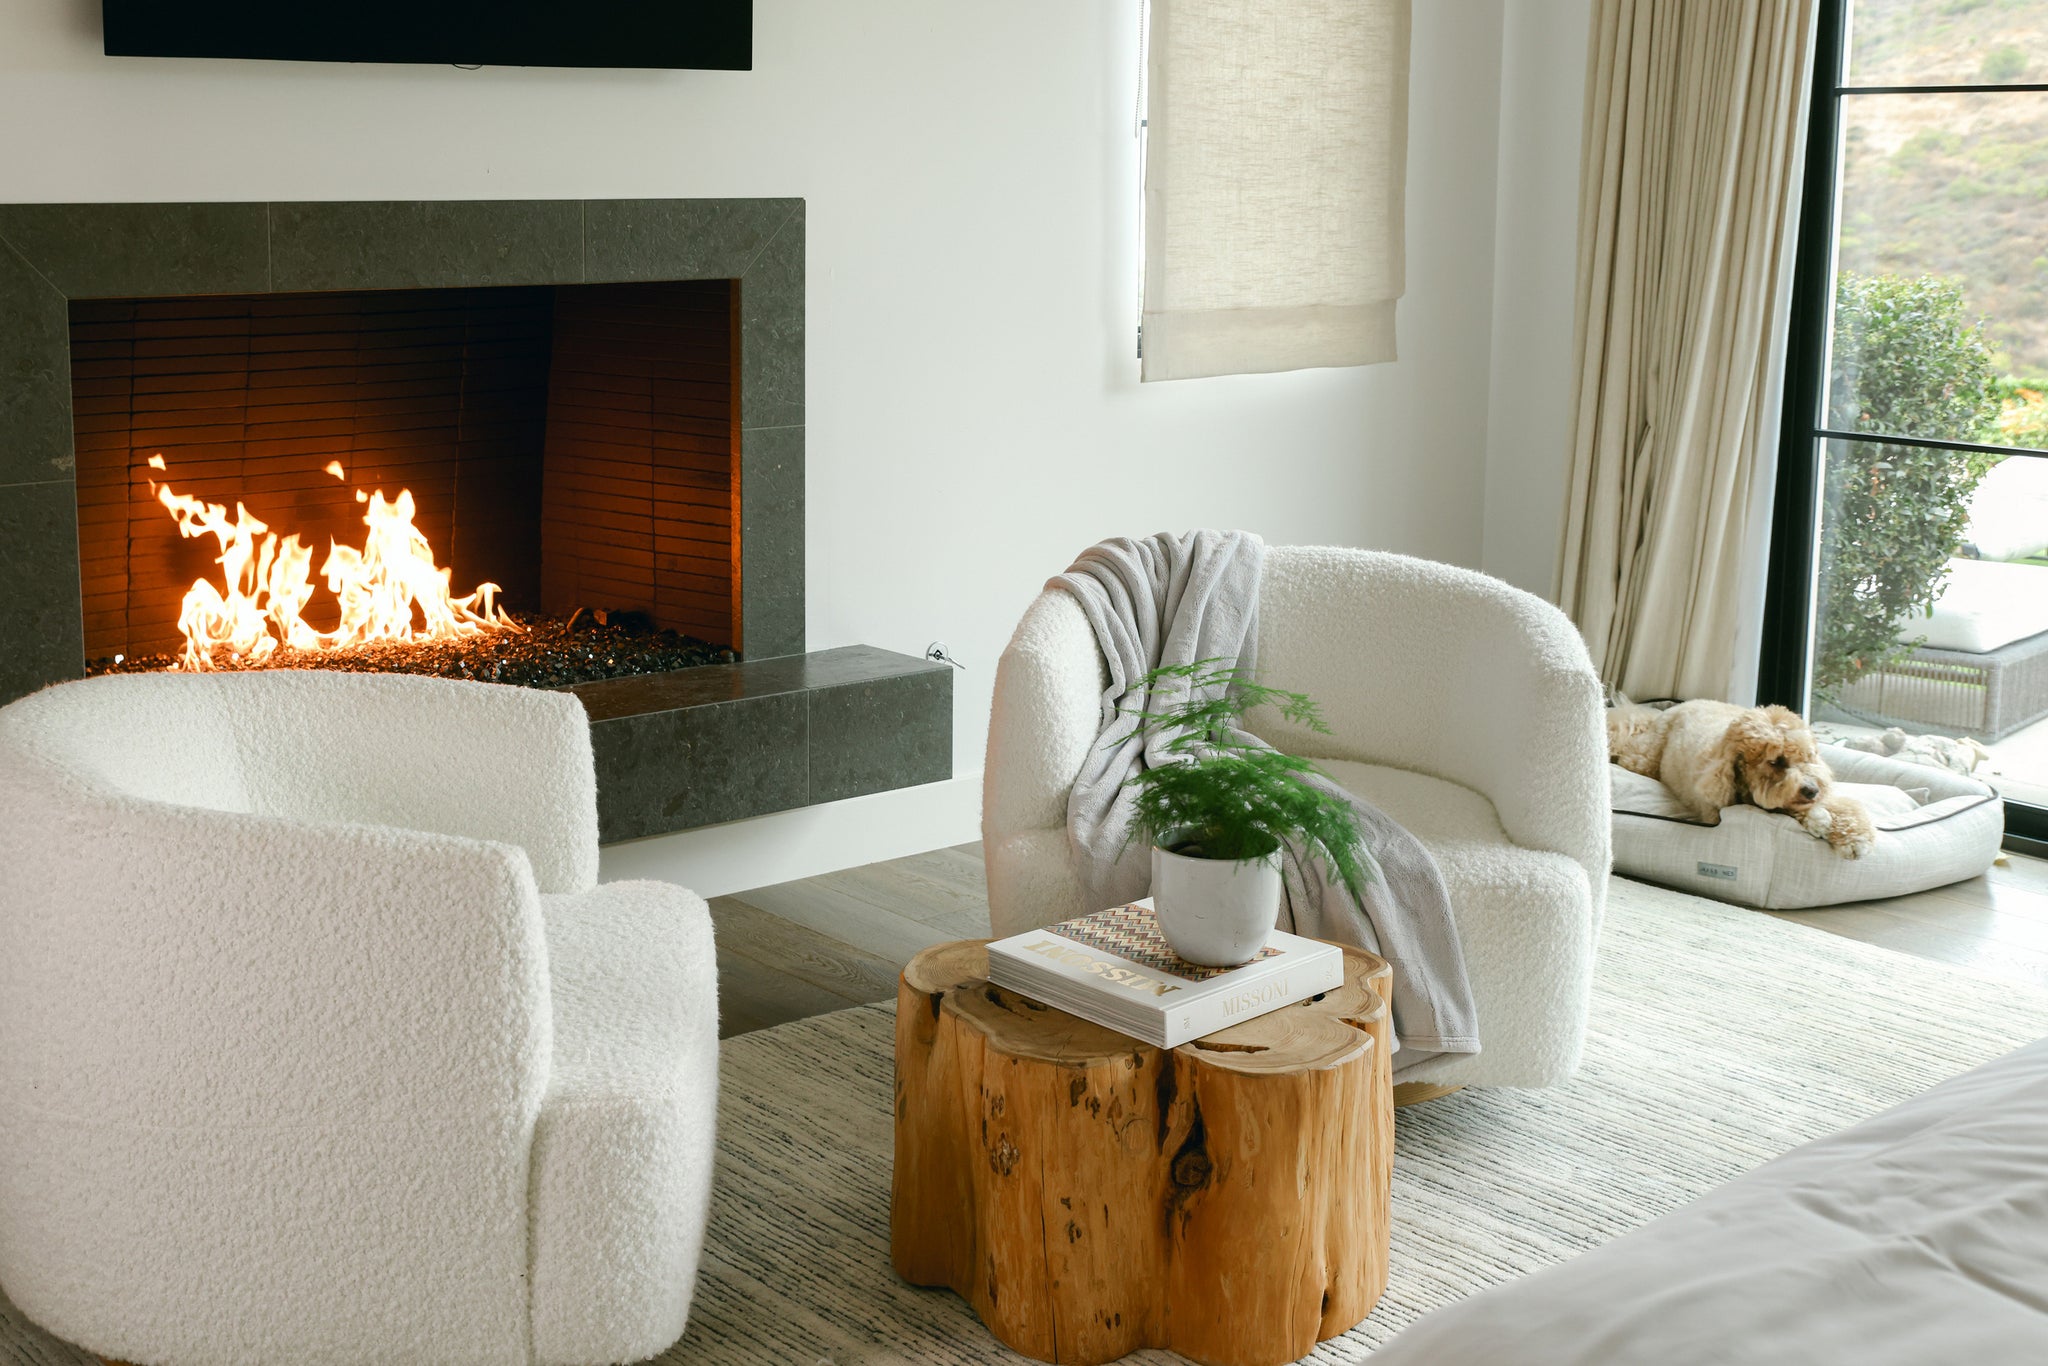 If you have a fireplace and mantle, put it to good use